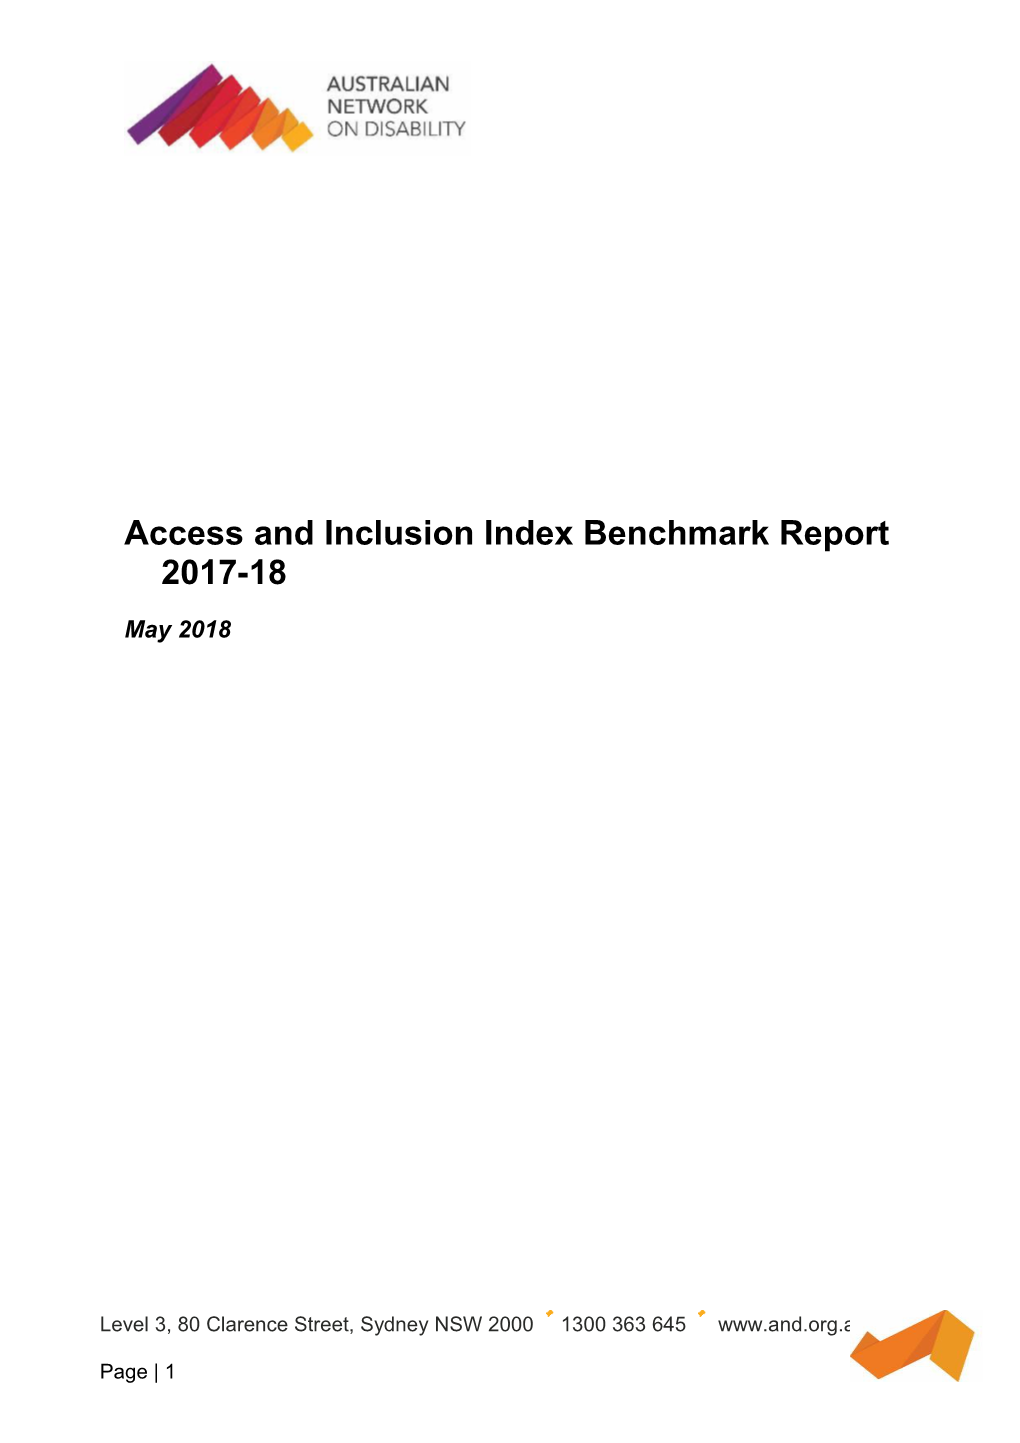 Access and Inclusion Index Benchmark Report2017-18